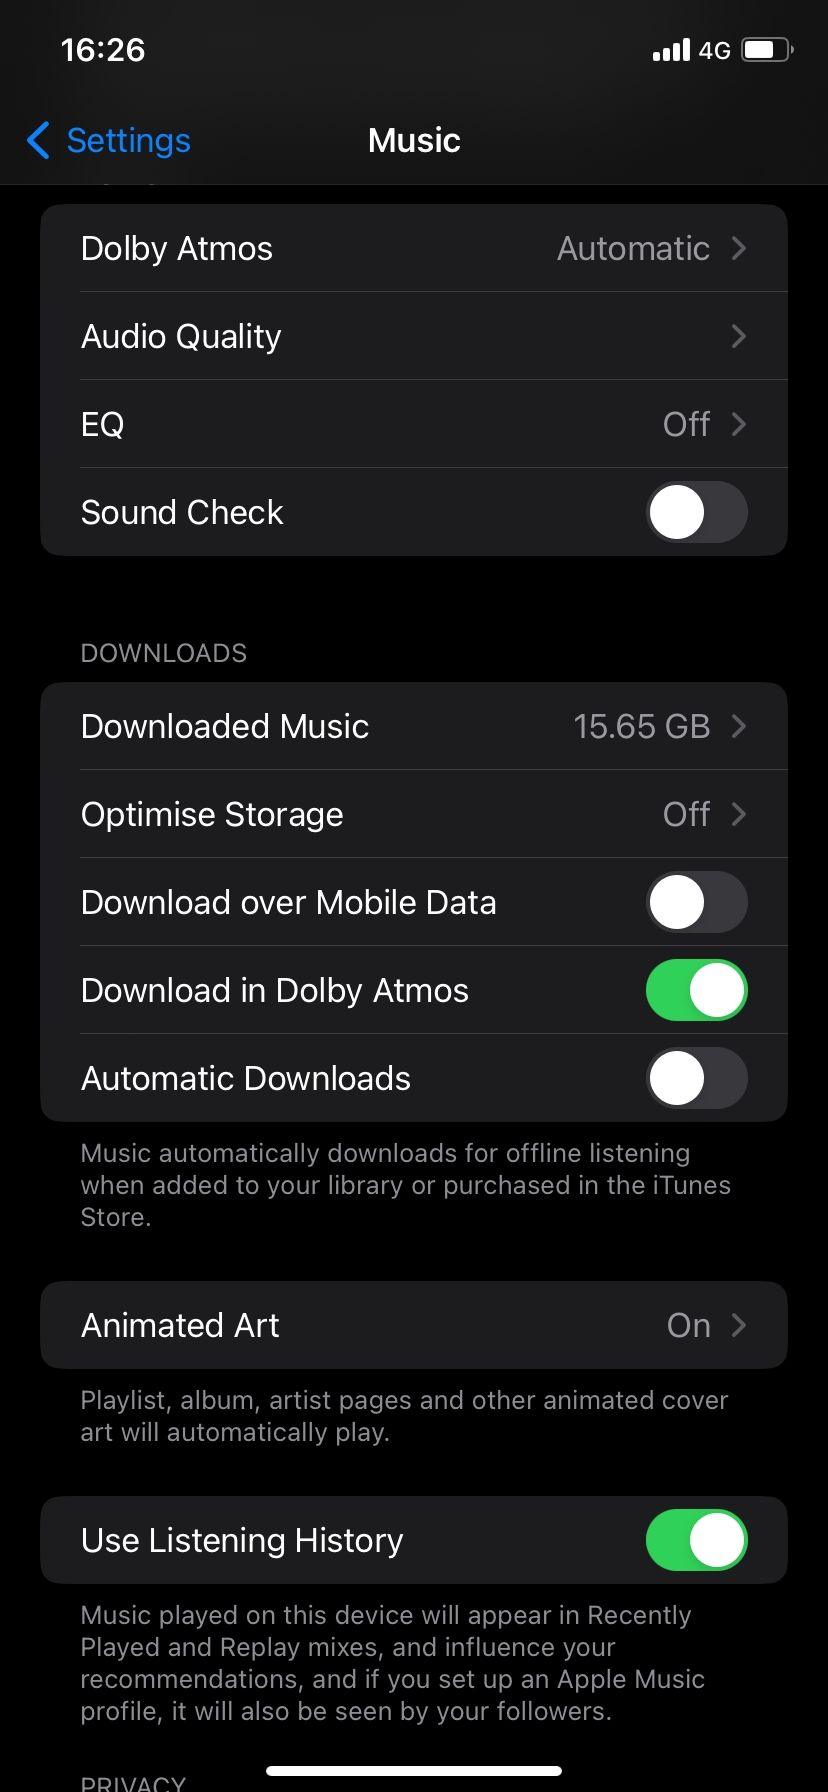 Download over mobile data disabled on Apple Music